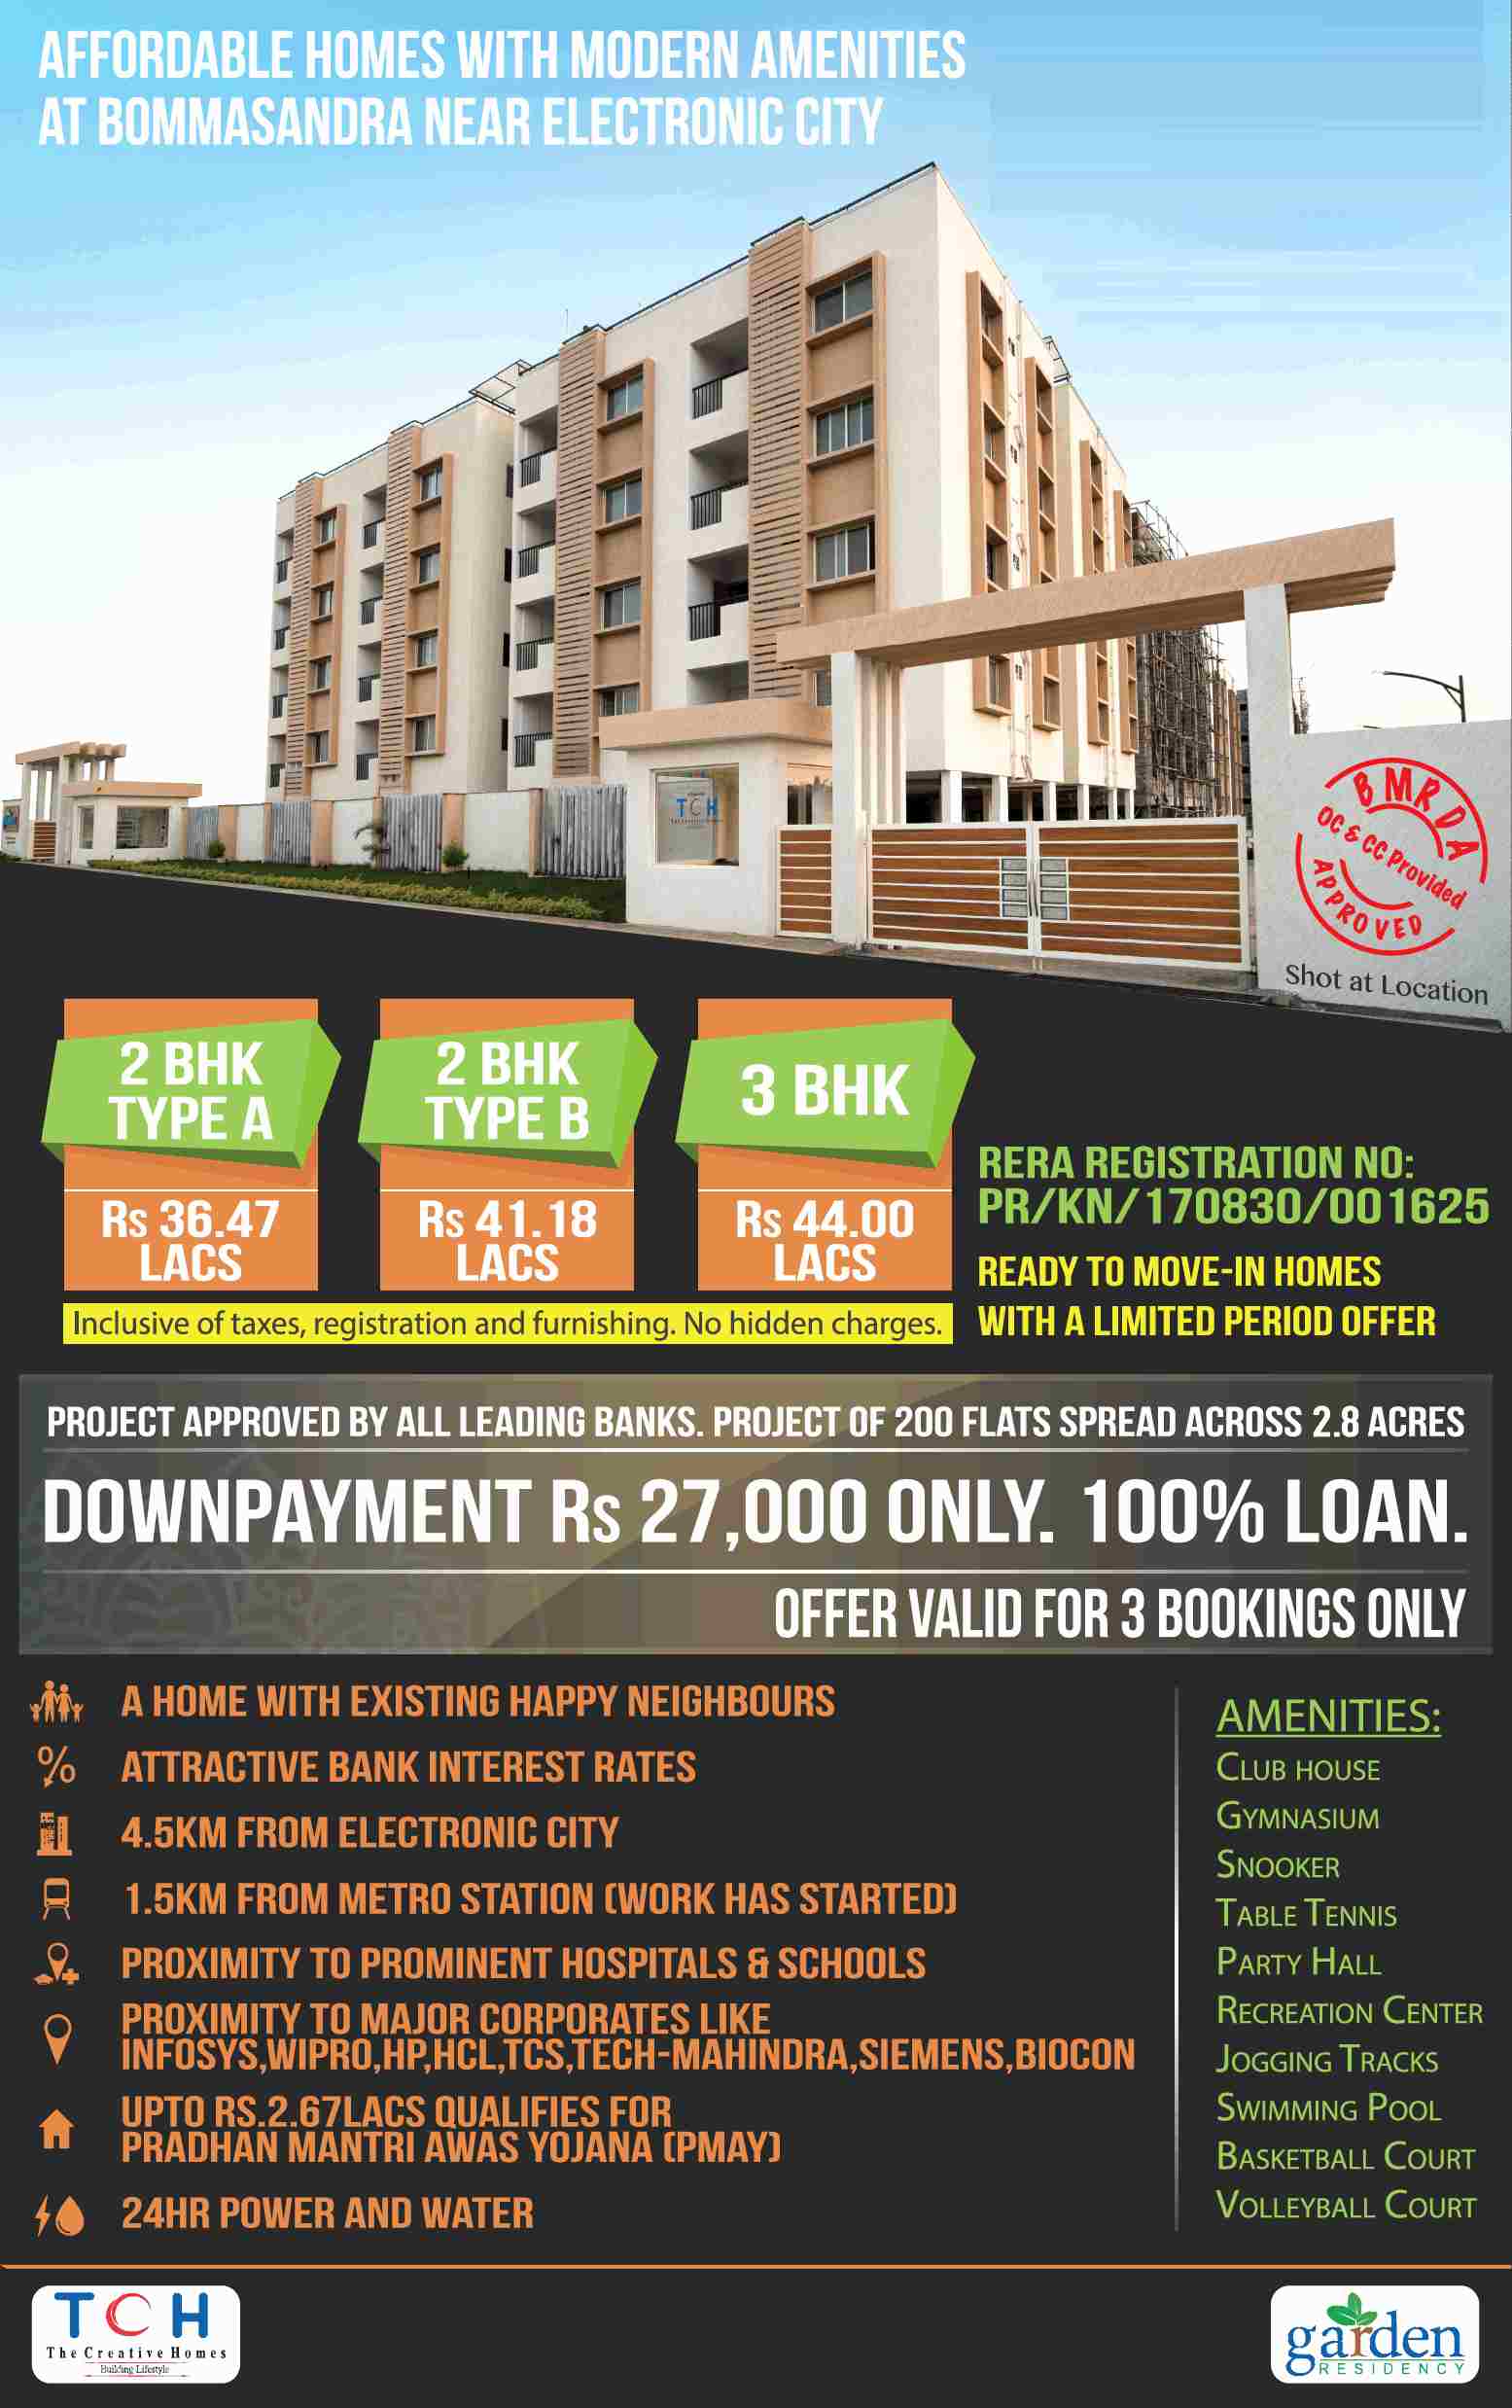 Book ready to move homes with limited period offer at TCH Garden Residency in Bangalore